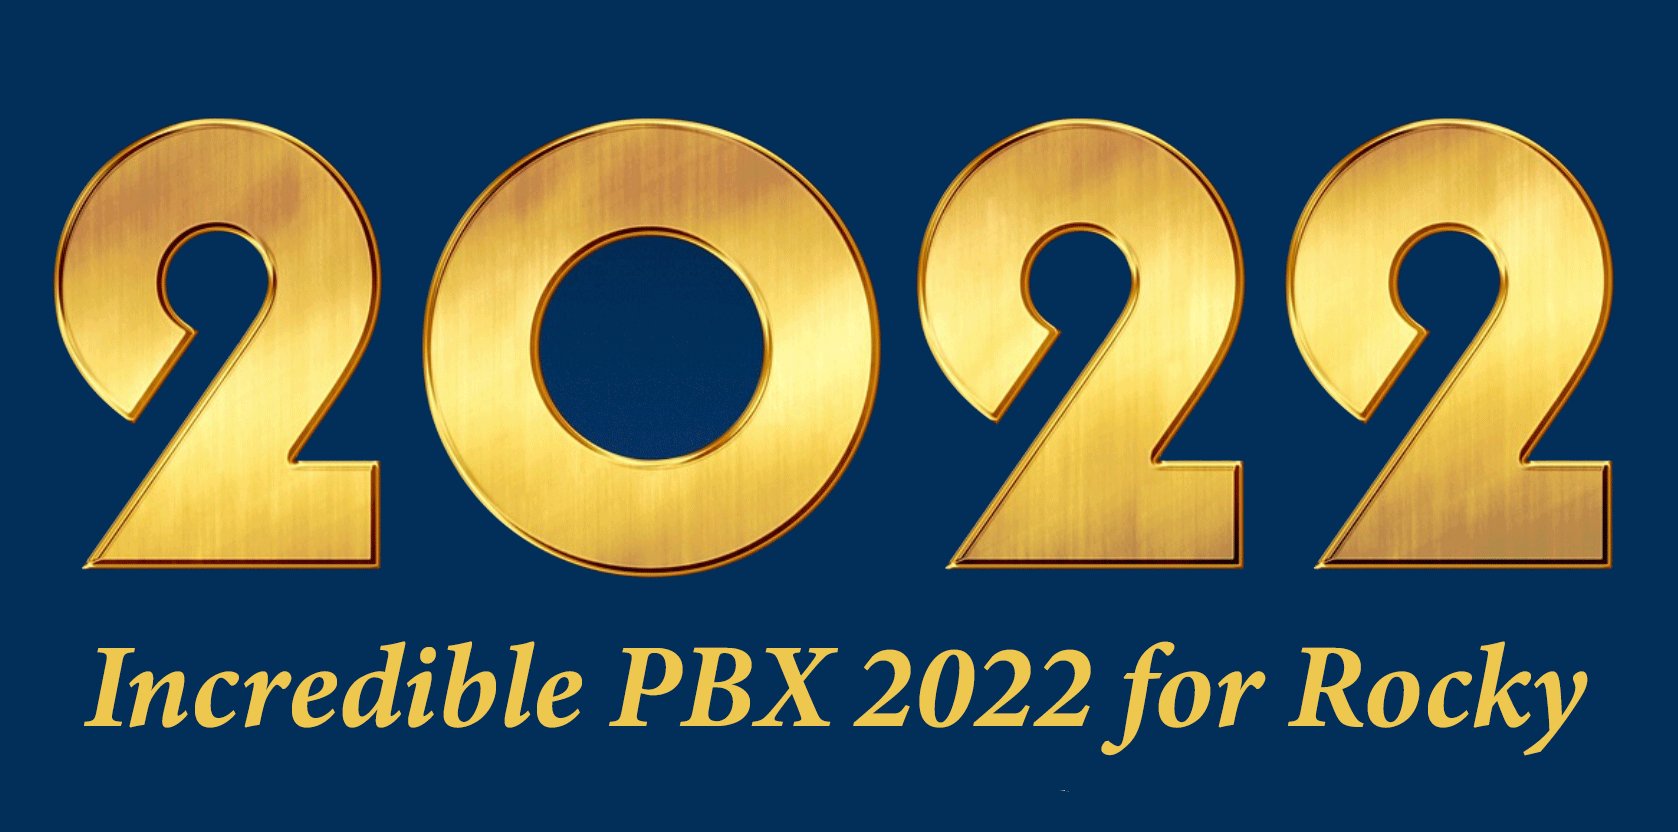 Introducing Incredible PBX 2022 for Rocky 8 Linux